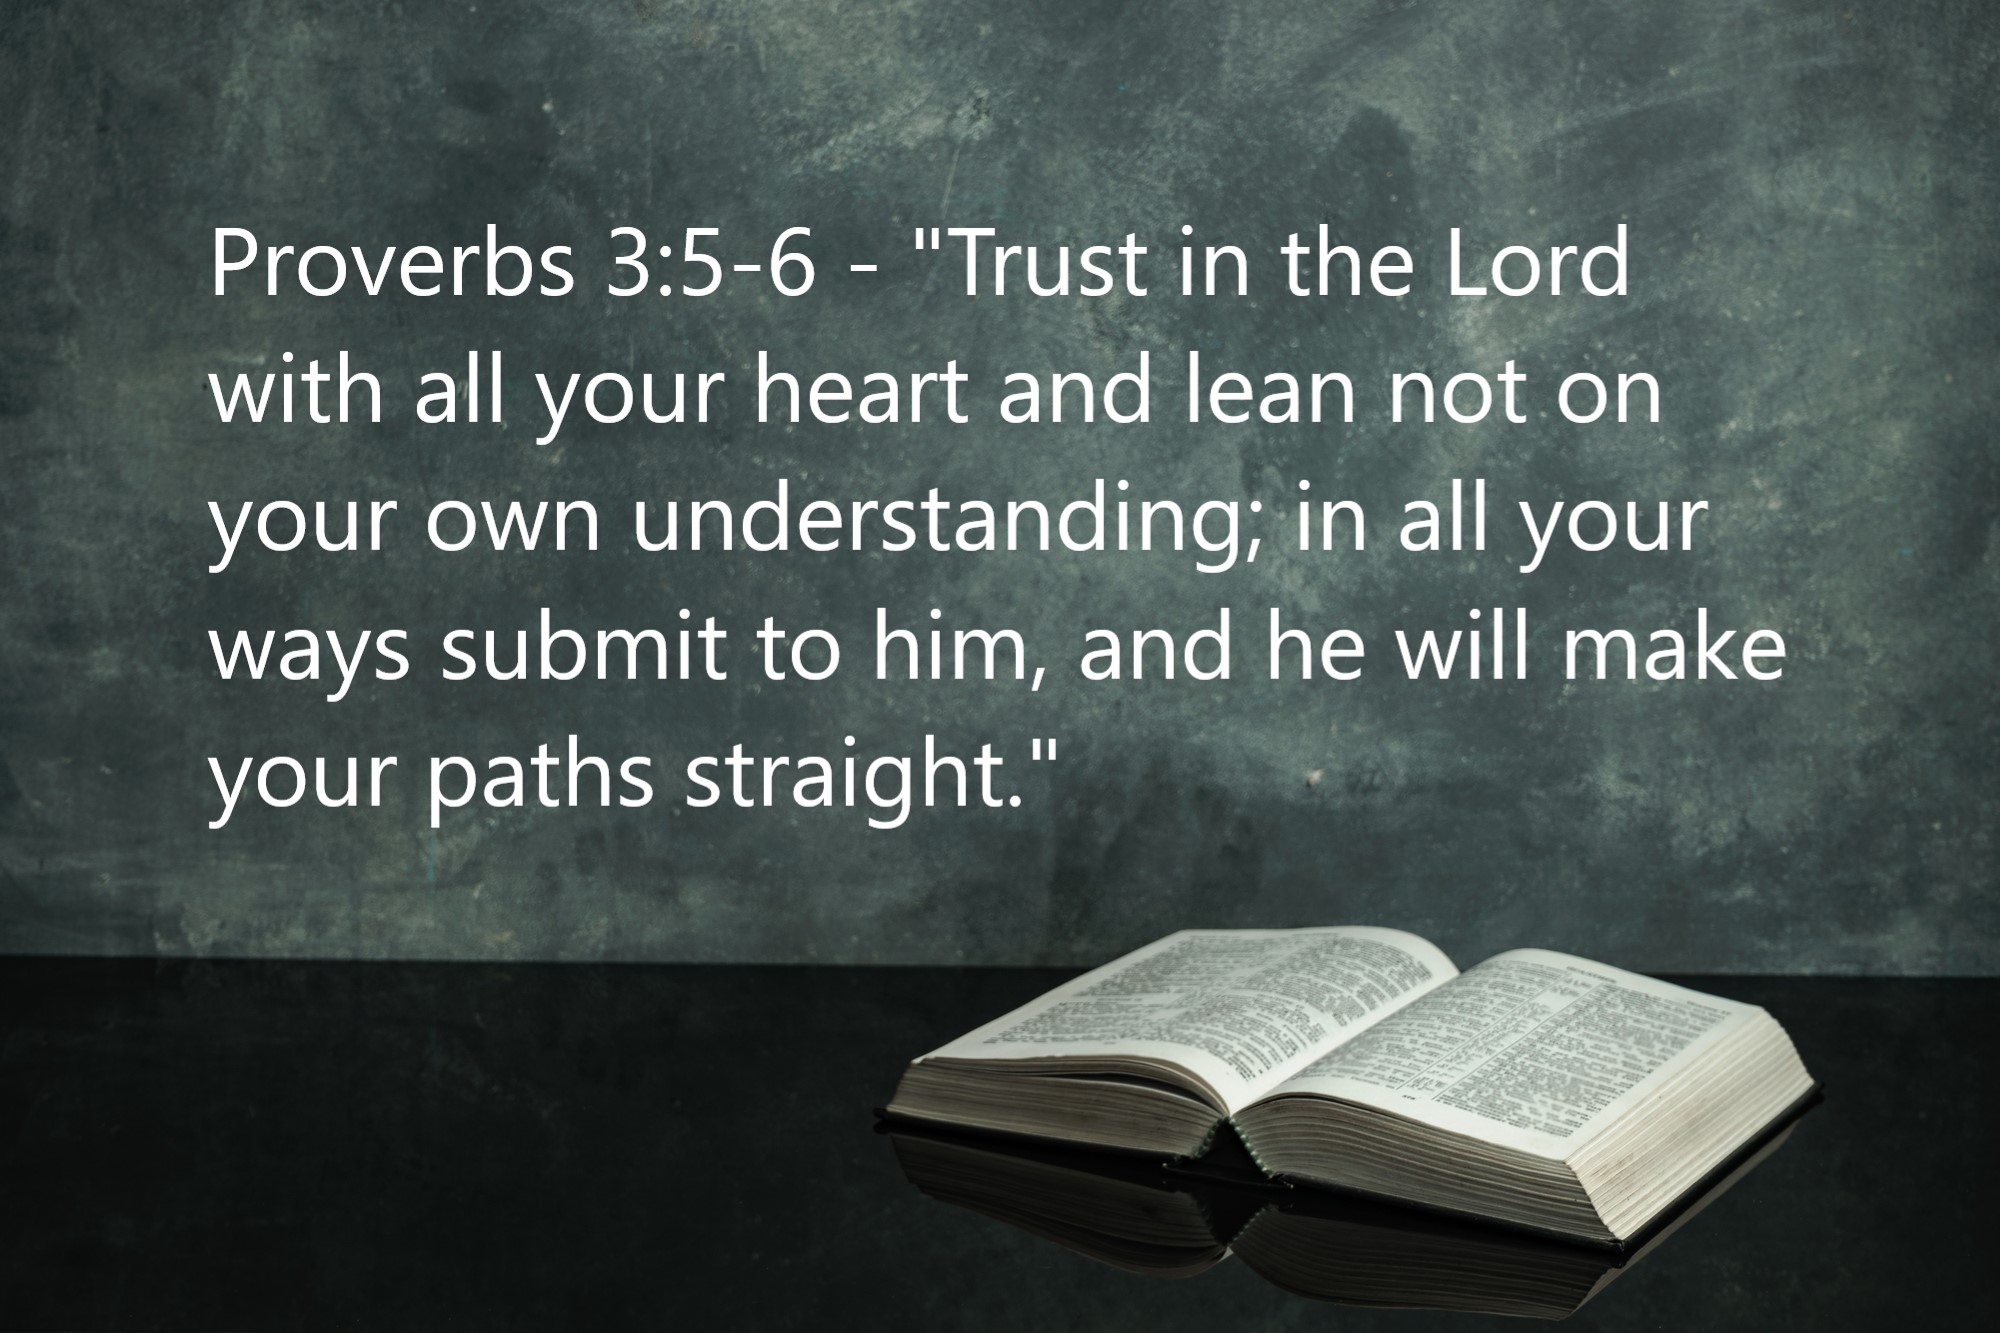 Proverbs 3:5-6 - "Trust in the Lord with all your heart and lean not on your own understanding; in all your ways submit to him, and he will make your paths straight."